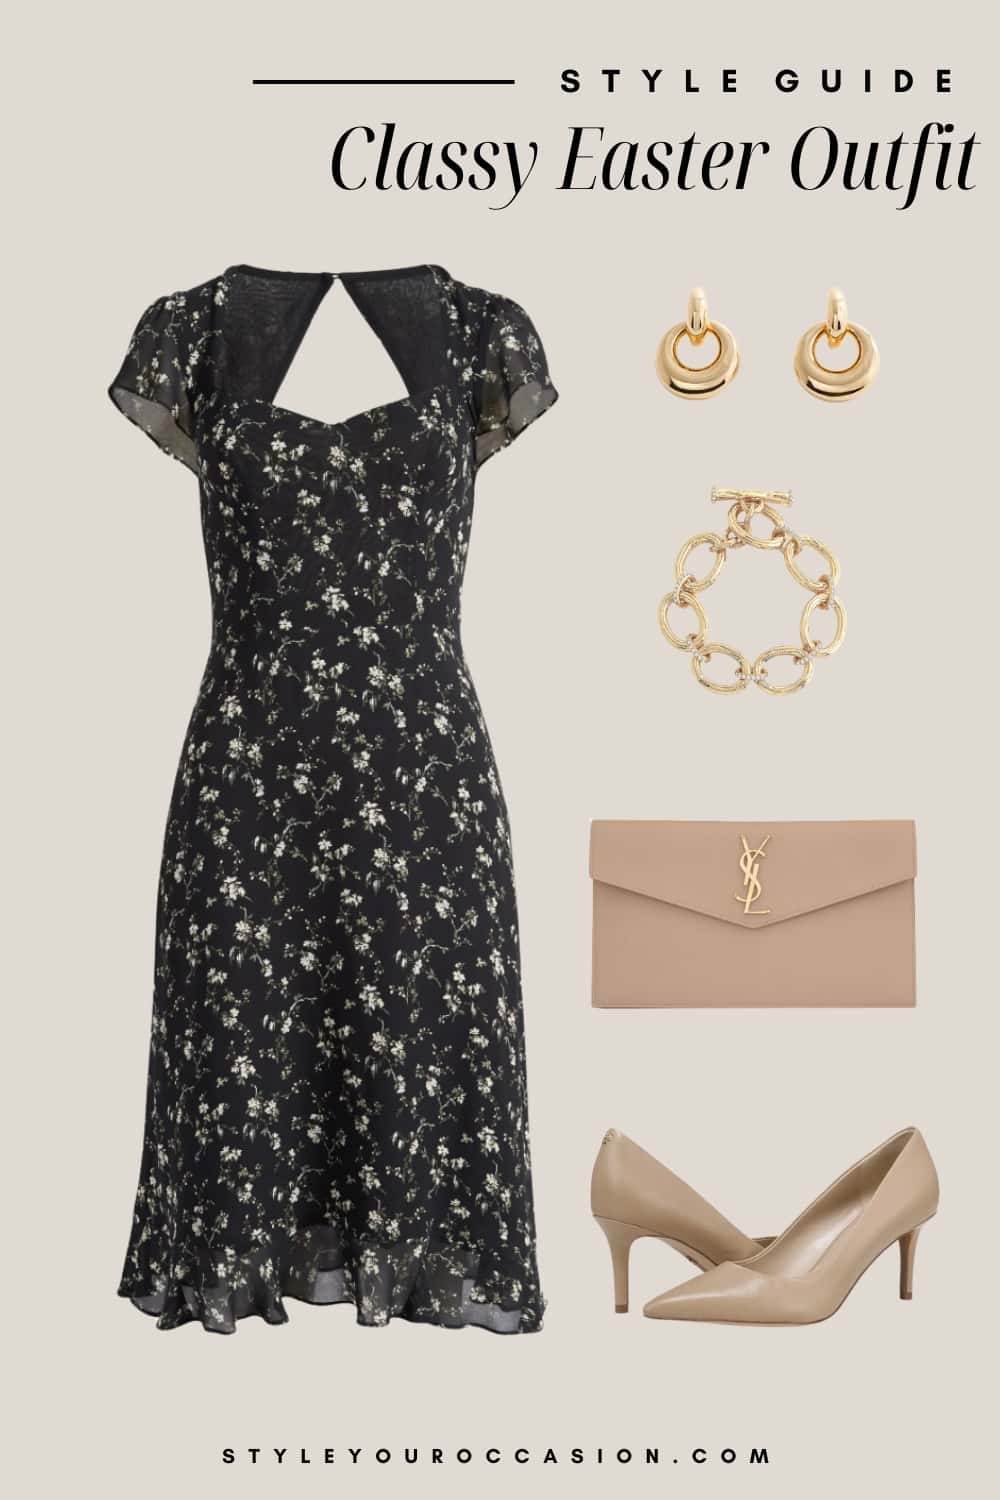 Flat lay graphic of black floral dress with nude pumps, a nude YSL pouch and gold jewelry.